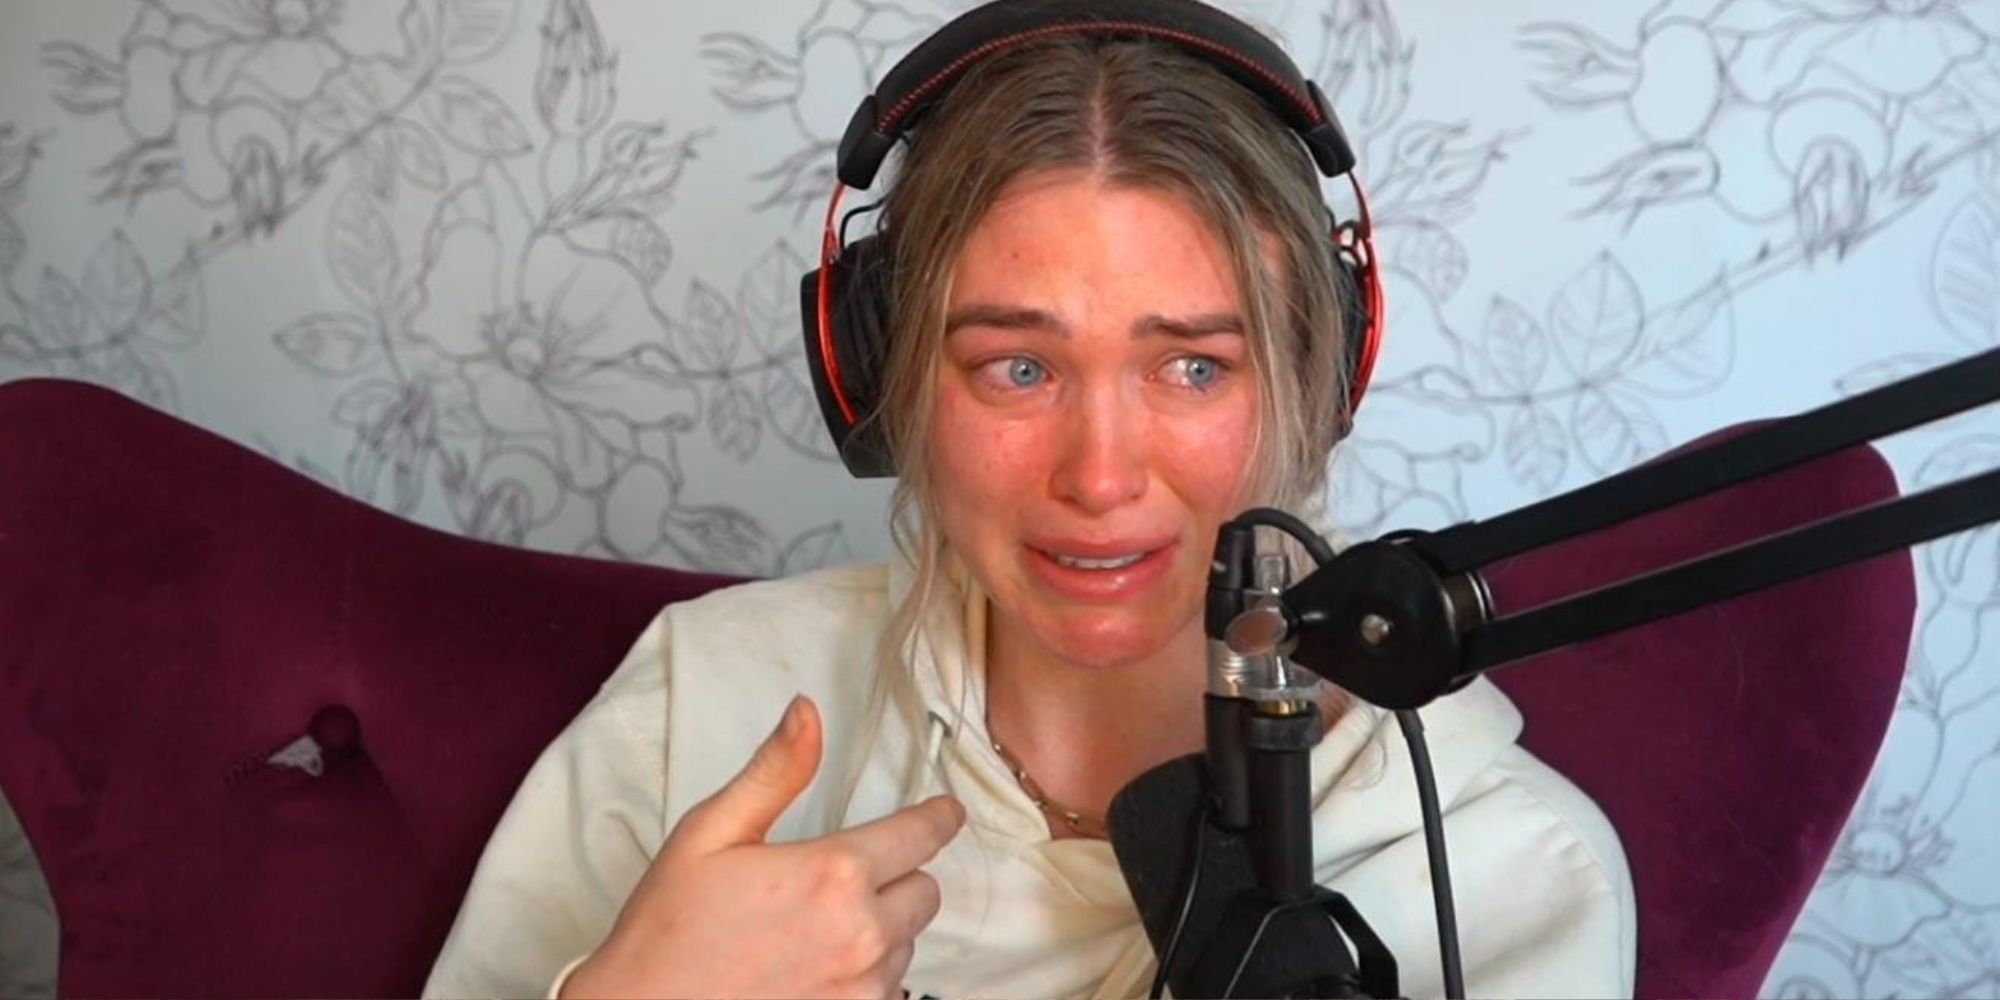 QTCinderella expressing her anguish, in tears, upon discovering deepfake media of herself